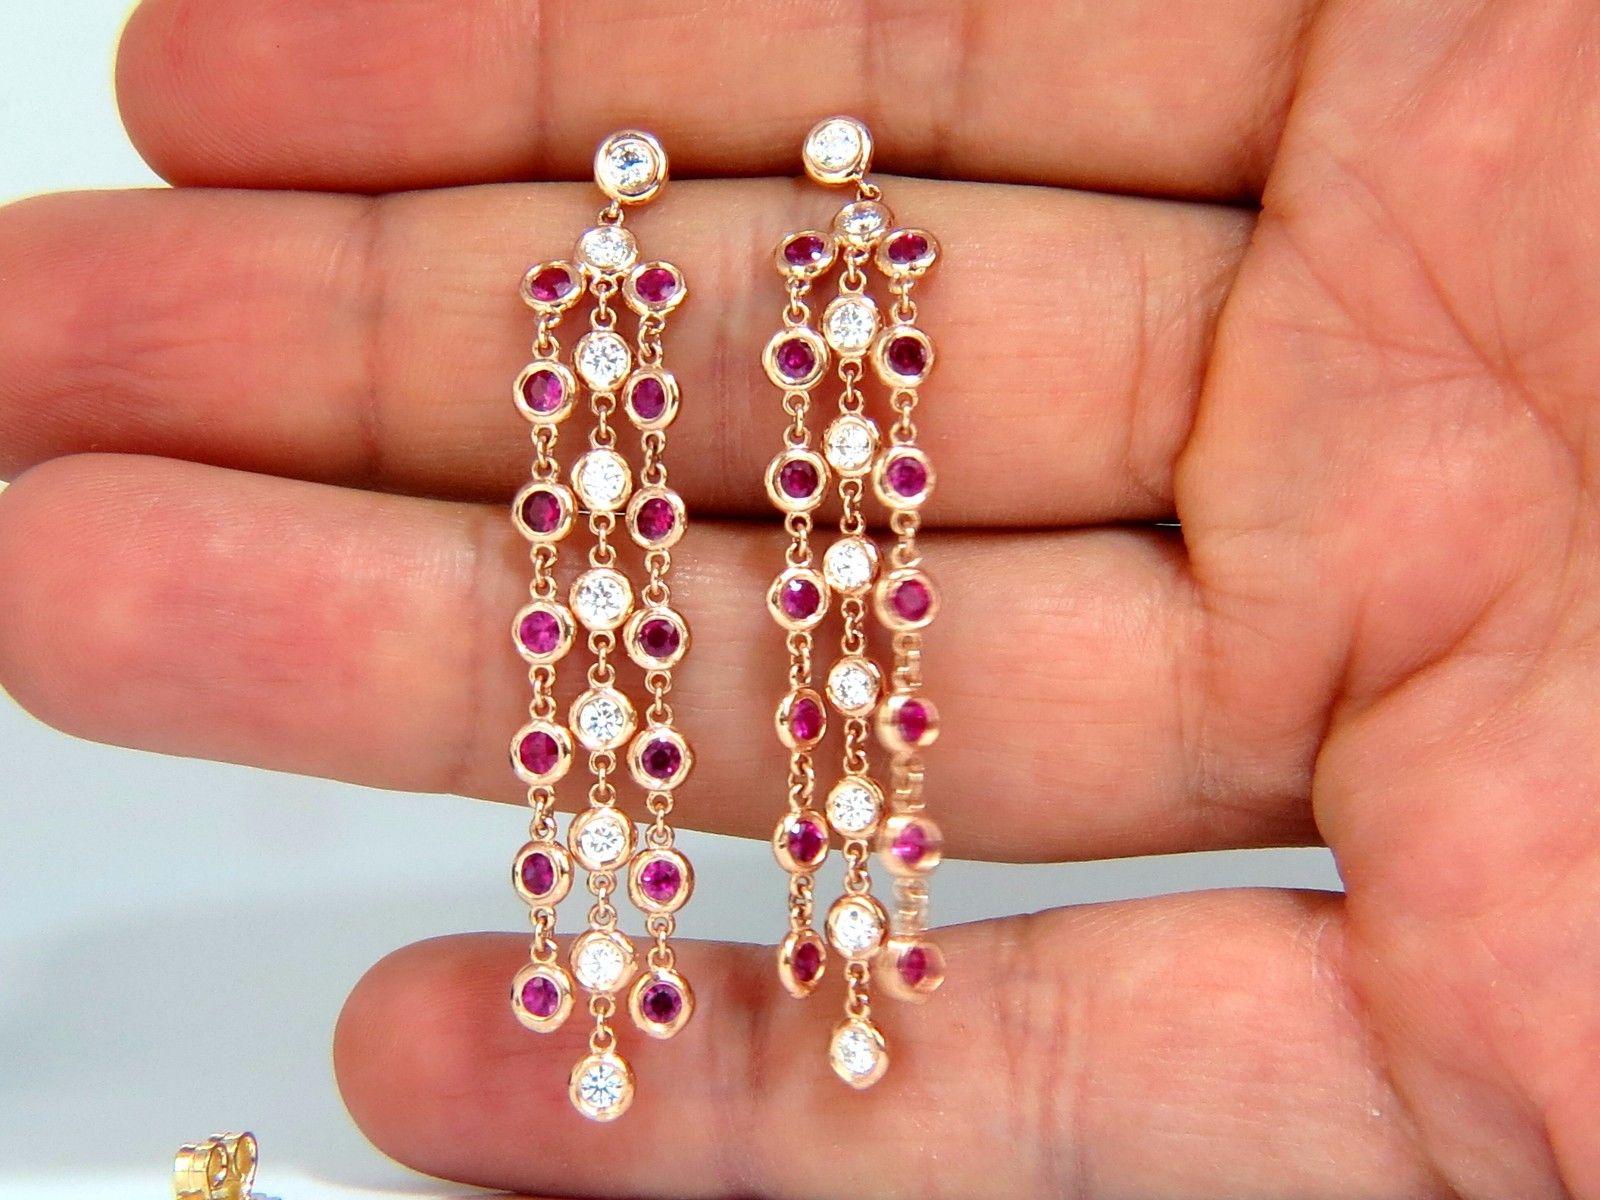 Ruby  & Diamonds By the Yard,  Dangling Earrings.

Three Tier.

2.00ct. Natural Rounds Brilliant cut Rubies.

Clean clarity, Deep Reds & Transparent.

Diamonds Total Weight: 1.00ct.

Rounds & Full cuts.

G-color vs-2 clarity.

14kt. rose gold

7.2